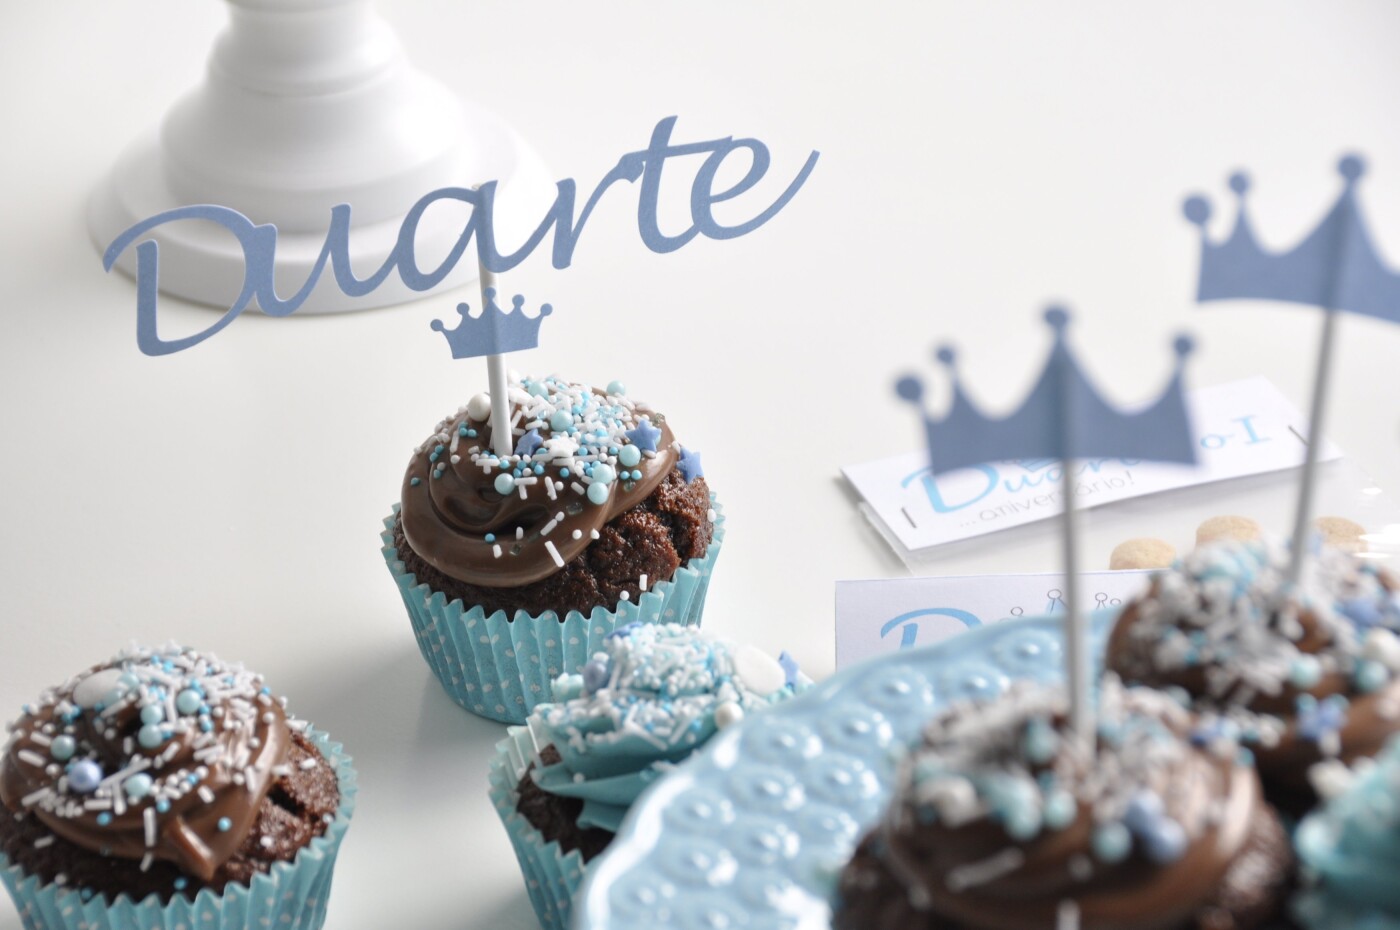 I have made these cupcakes for Duarte's first birthday. He is the lovely son of two of my closest friends and I was very happy to be a part of their family's celebration. Duarte was also the name of the 11th Portuguese king, so the blue crown set the theme of the party, as chosen by Duarte's parents. Isn't it just perfect?